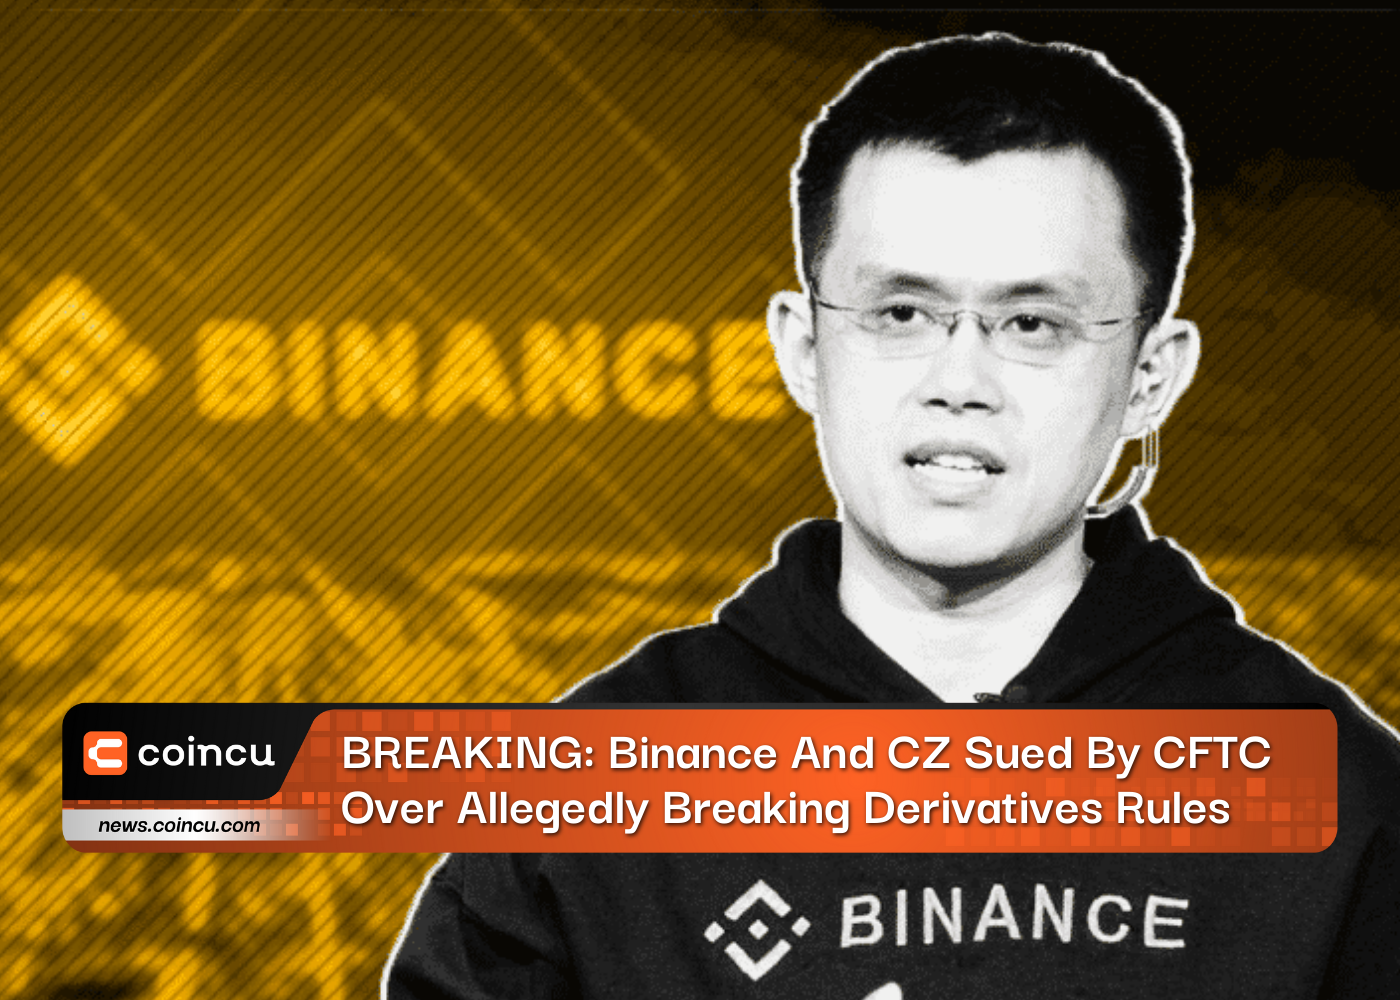 BREAKING: Binance And CZ Sued By CFTC Over Allegedly Breaking Derivatives Rules